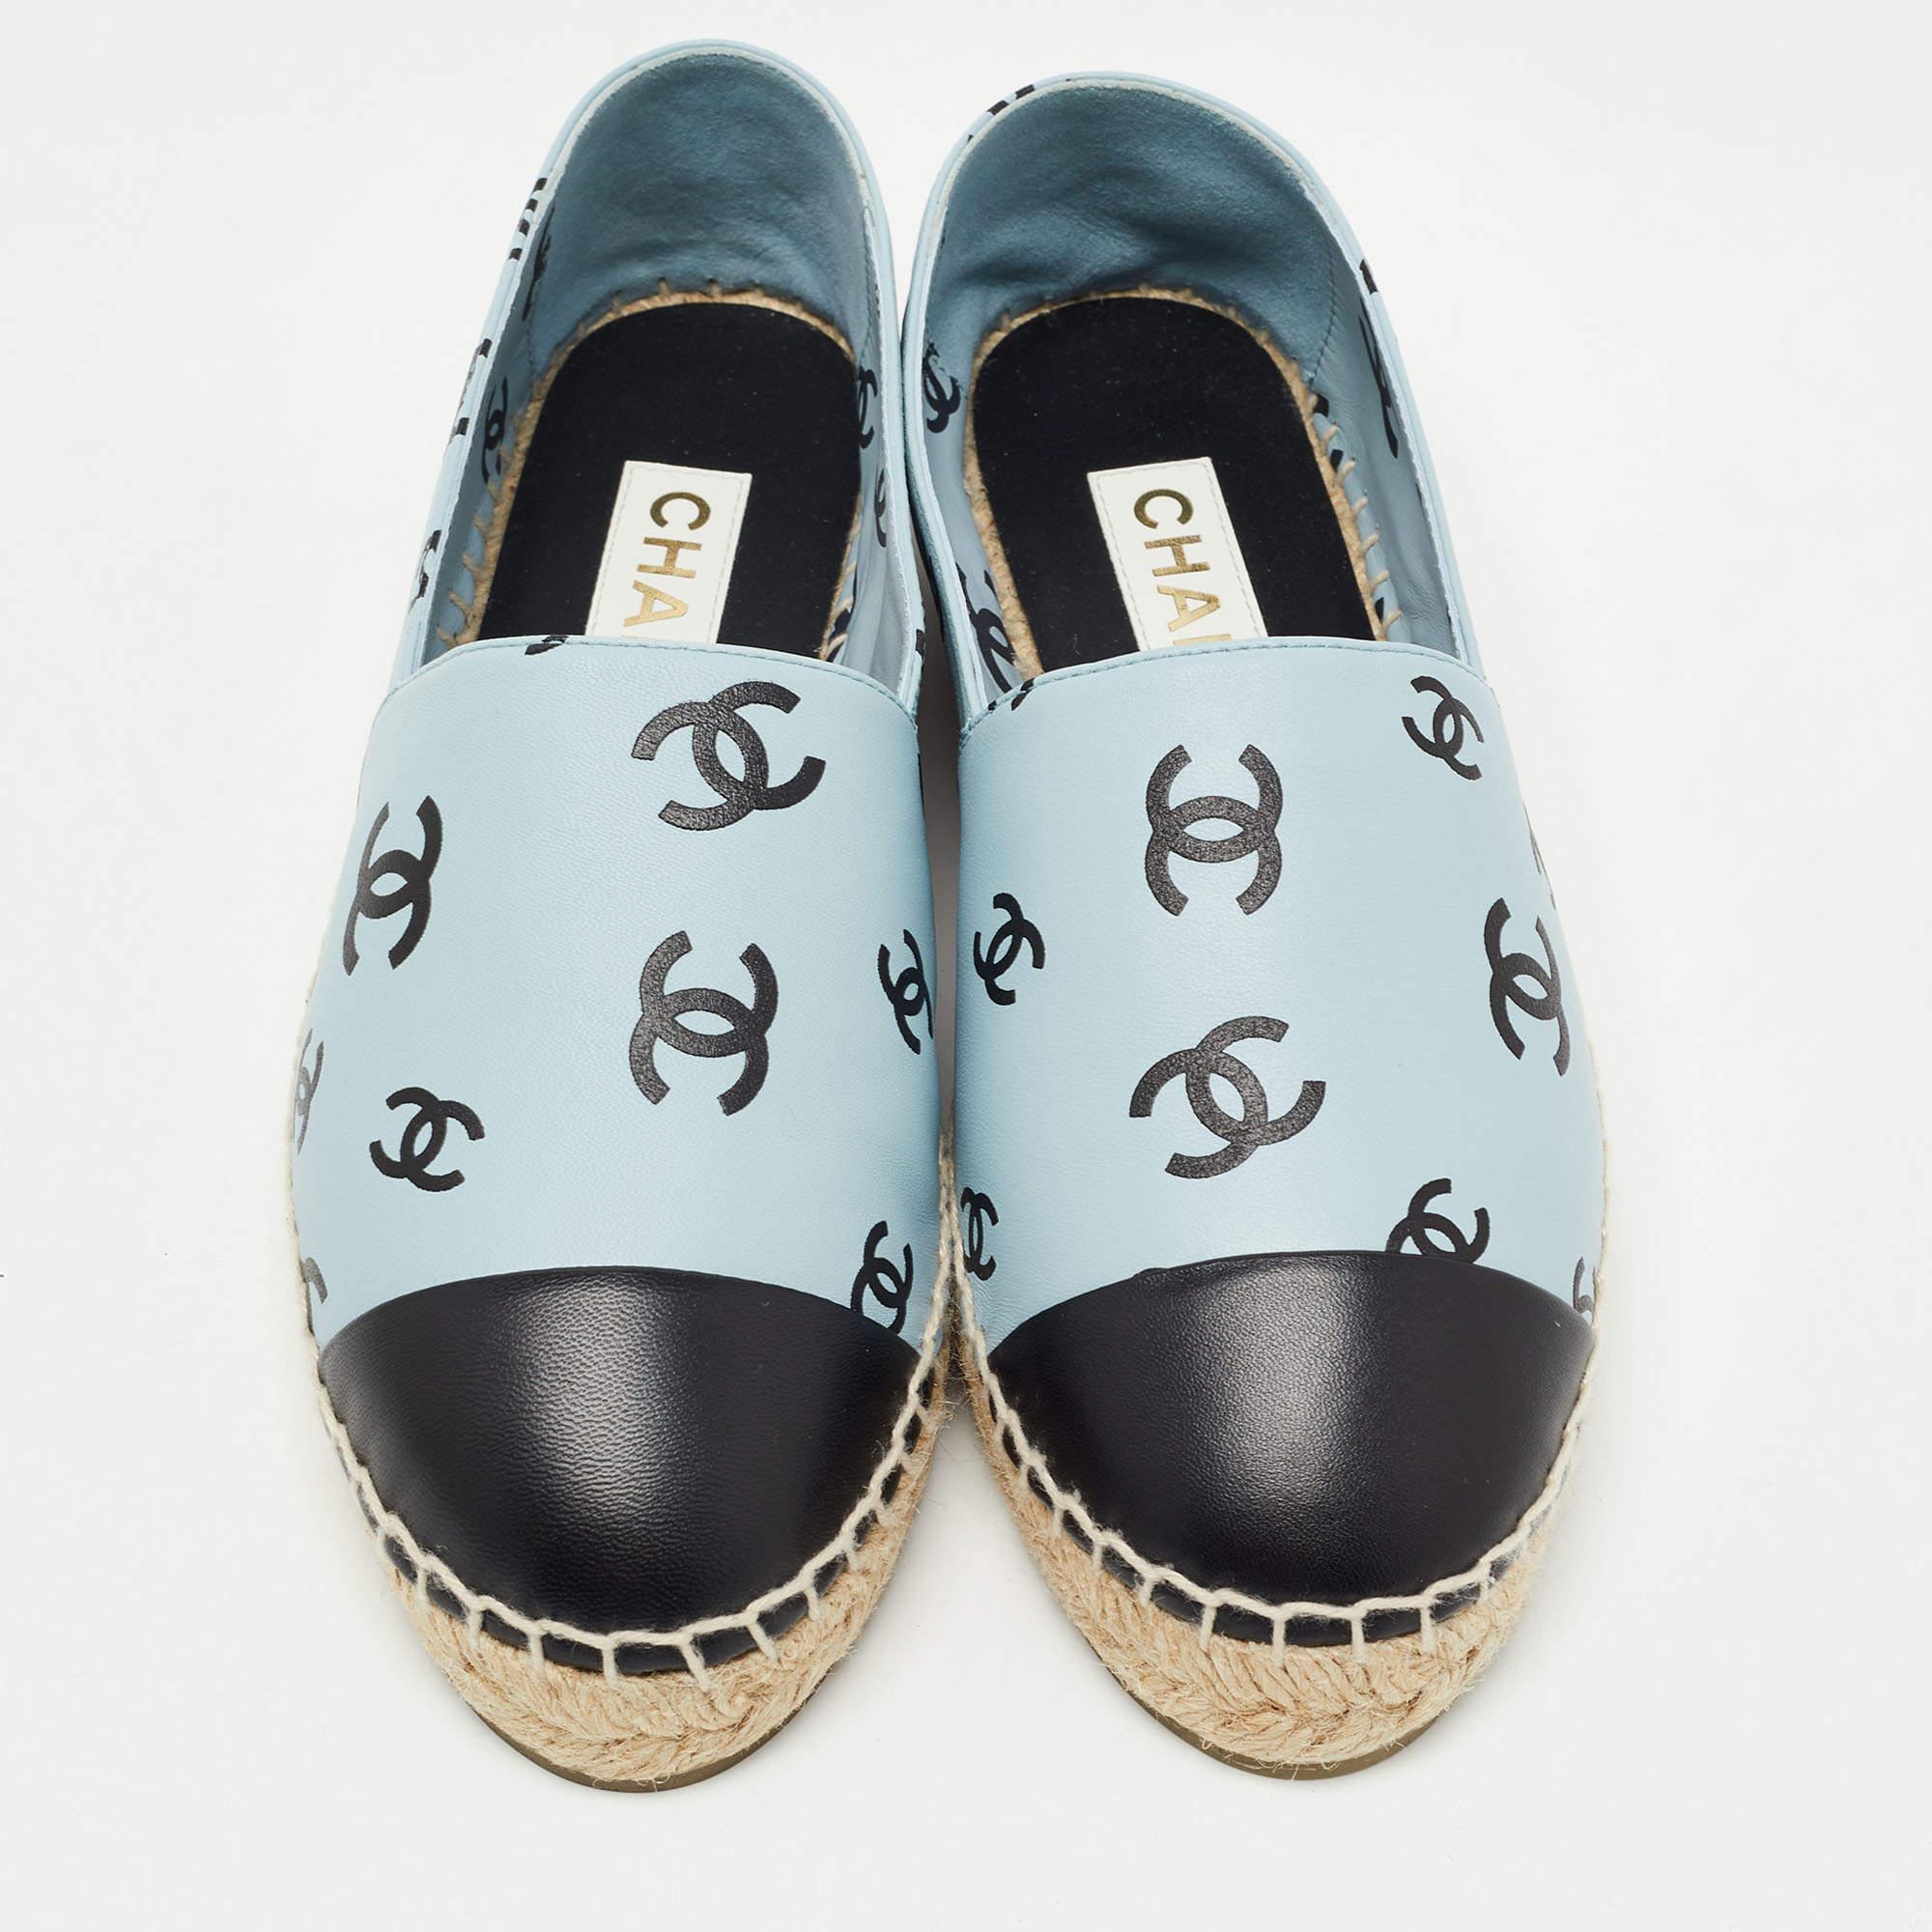 These Chanel CC espadrilles exude cool summer vibes while giving all the comfort to your feet. They bring along a well-built silhouette and the house's signature aesthetics. Wear them with anything: jeans, dresses, shorts.

Includes: Original